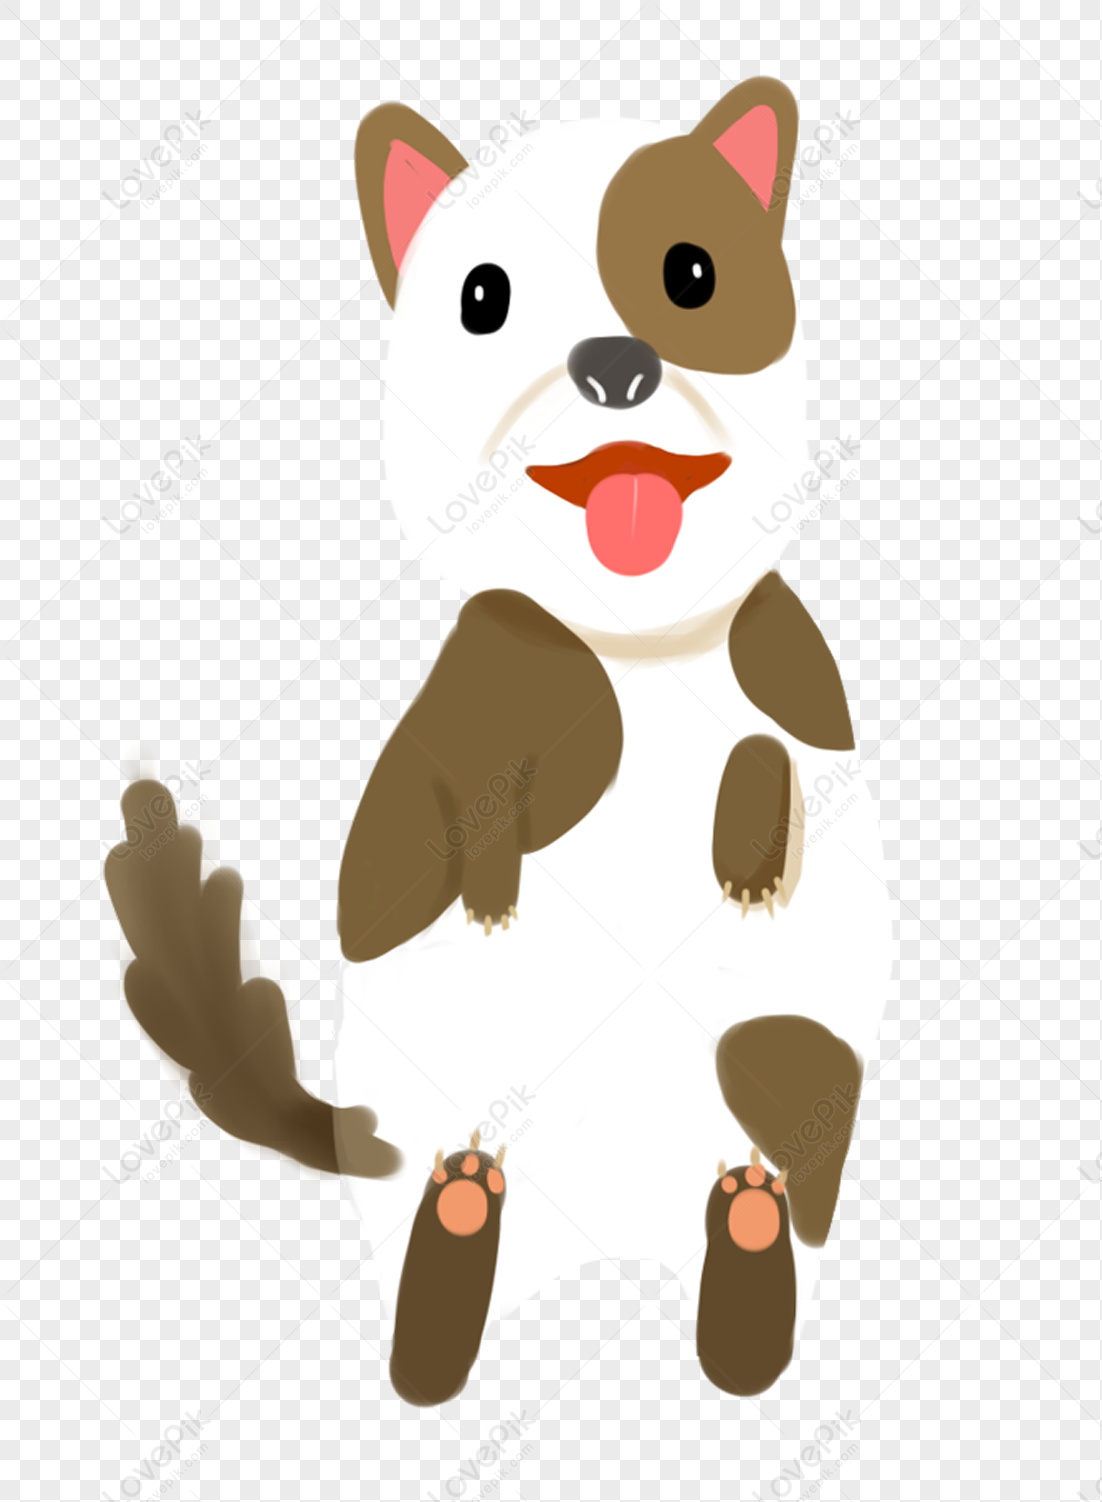 Cartoon Dog Free PNG And Clipart Image For Free Download - Lovepik |  400219319